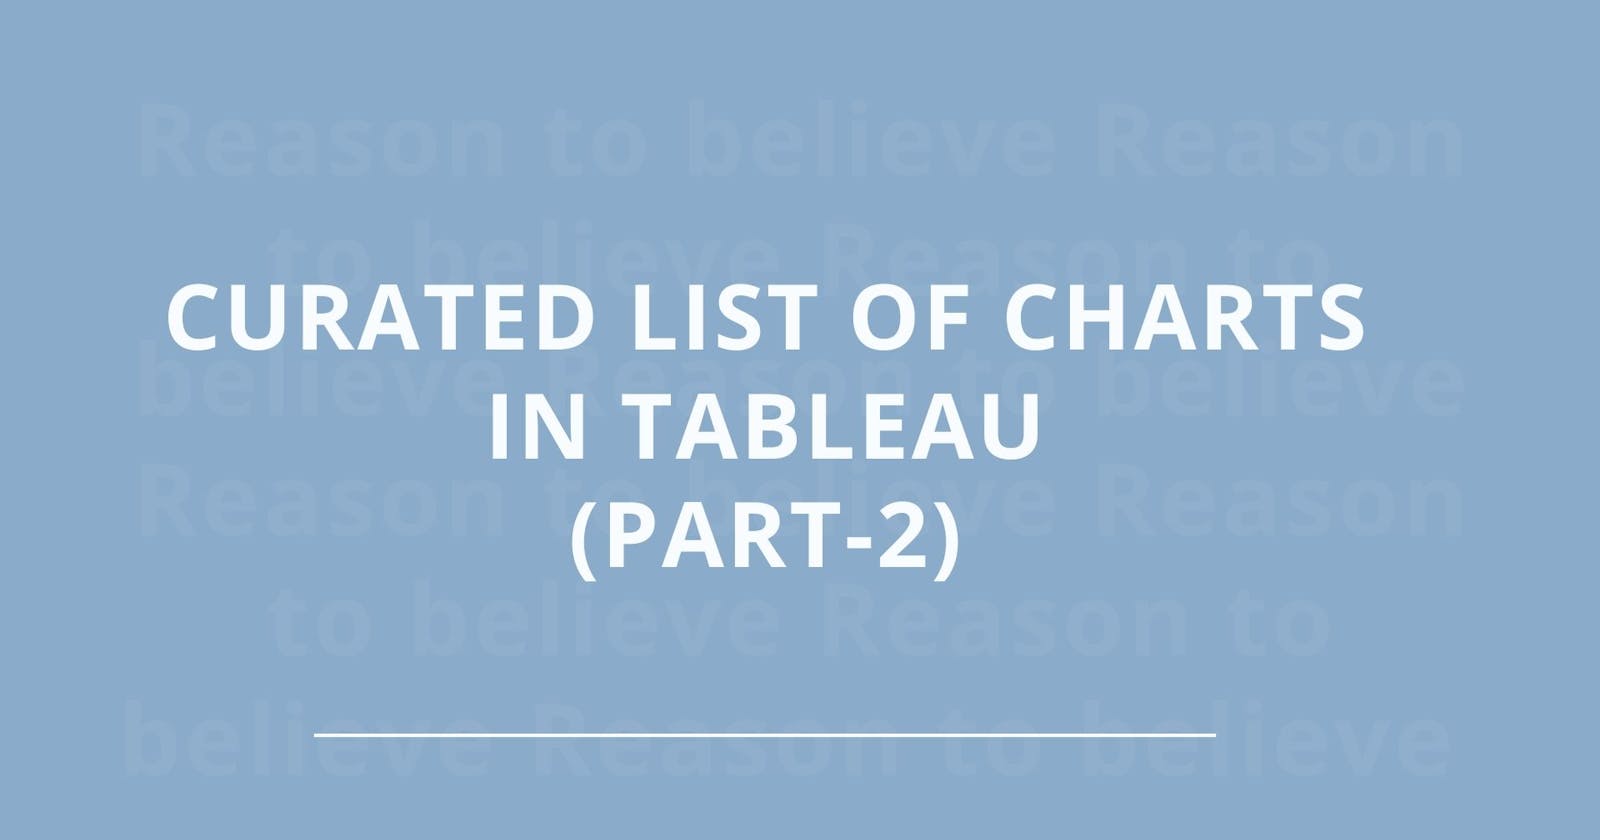 Curated list of charts in Tableau (Part 2)